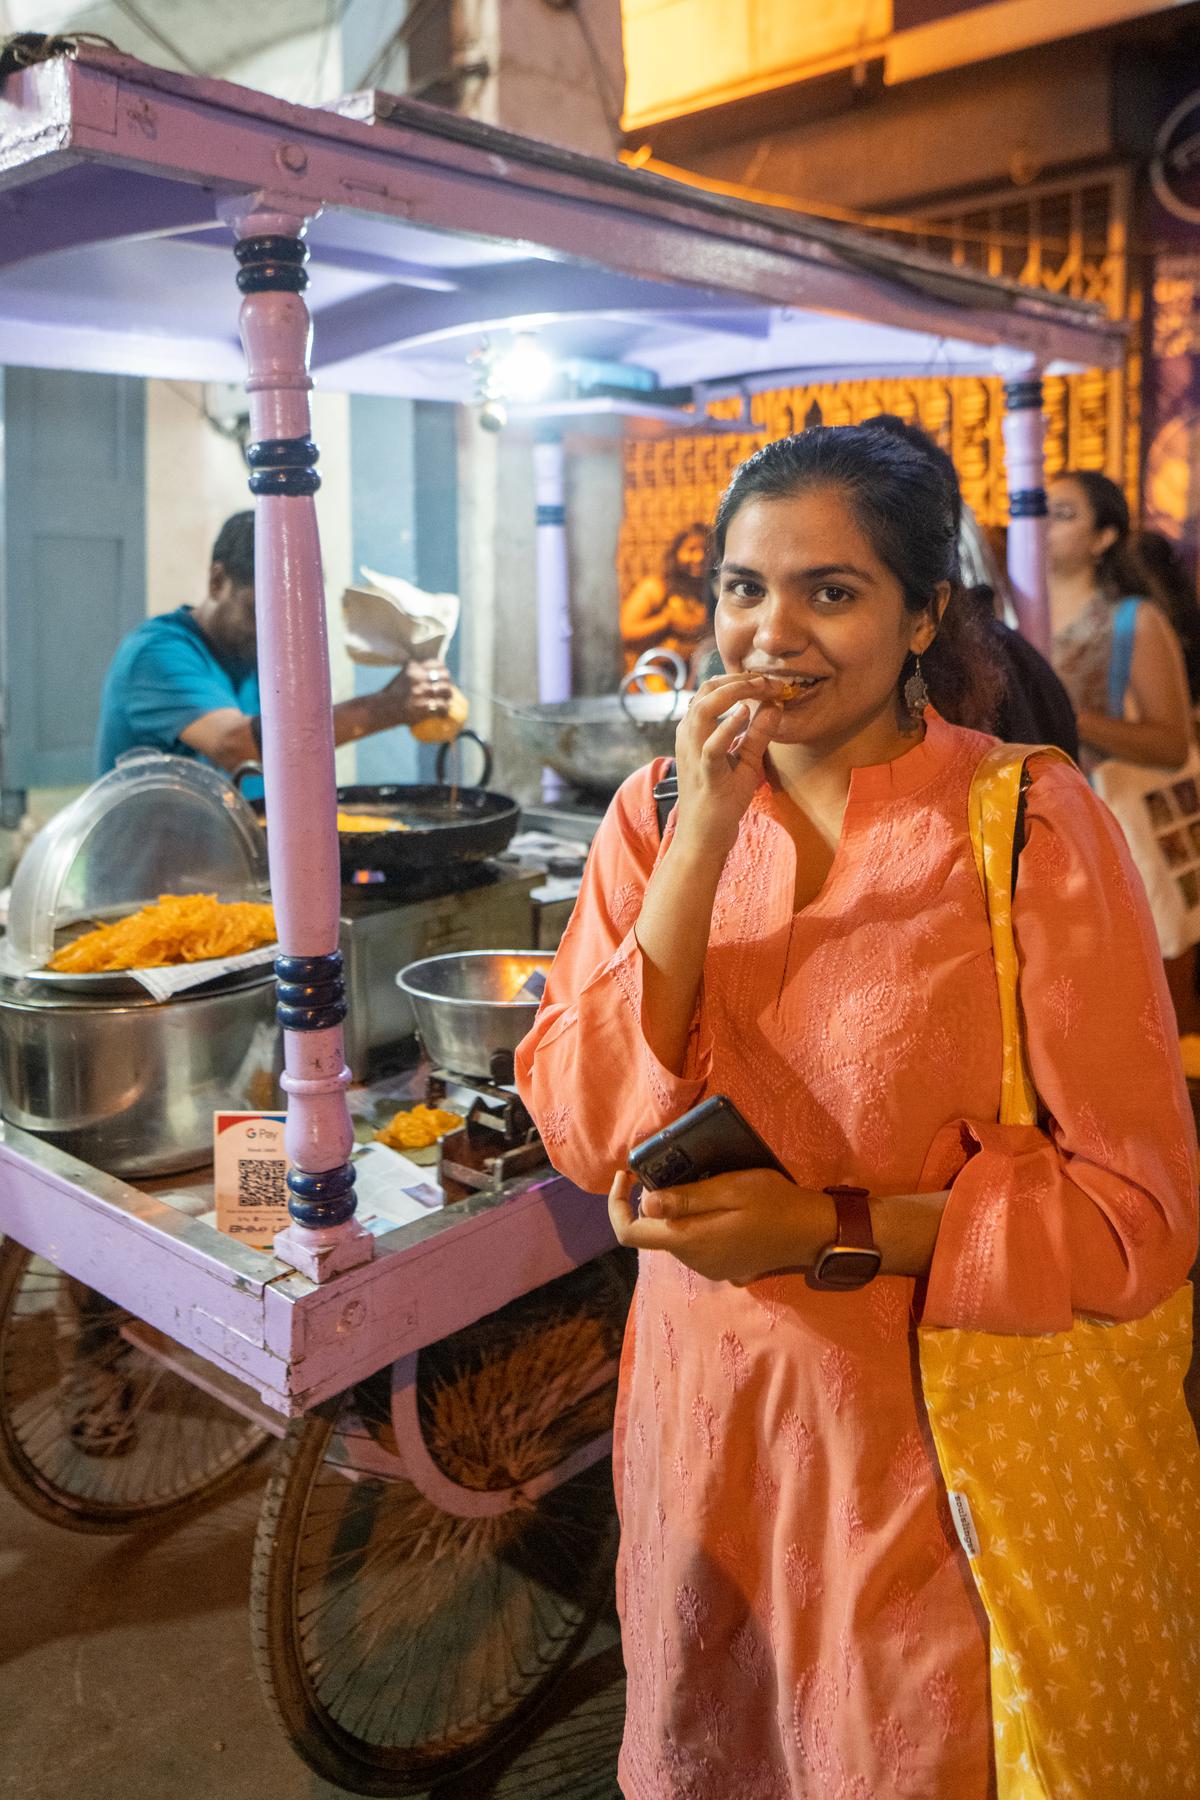 Tulika Bhattacharya, a 24-year-old consultant from the city, savors hot jalebis from a street cart in Chickpet during a walk.